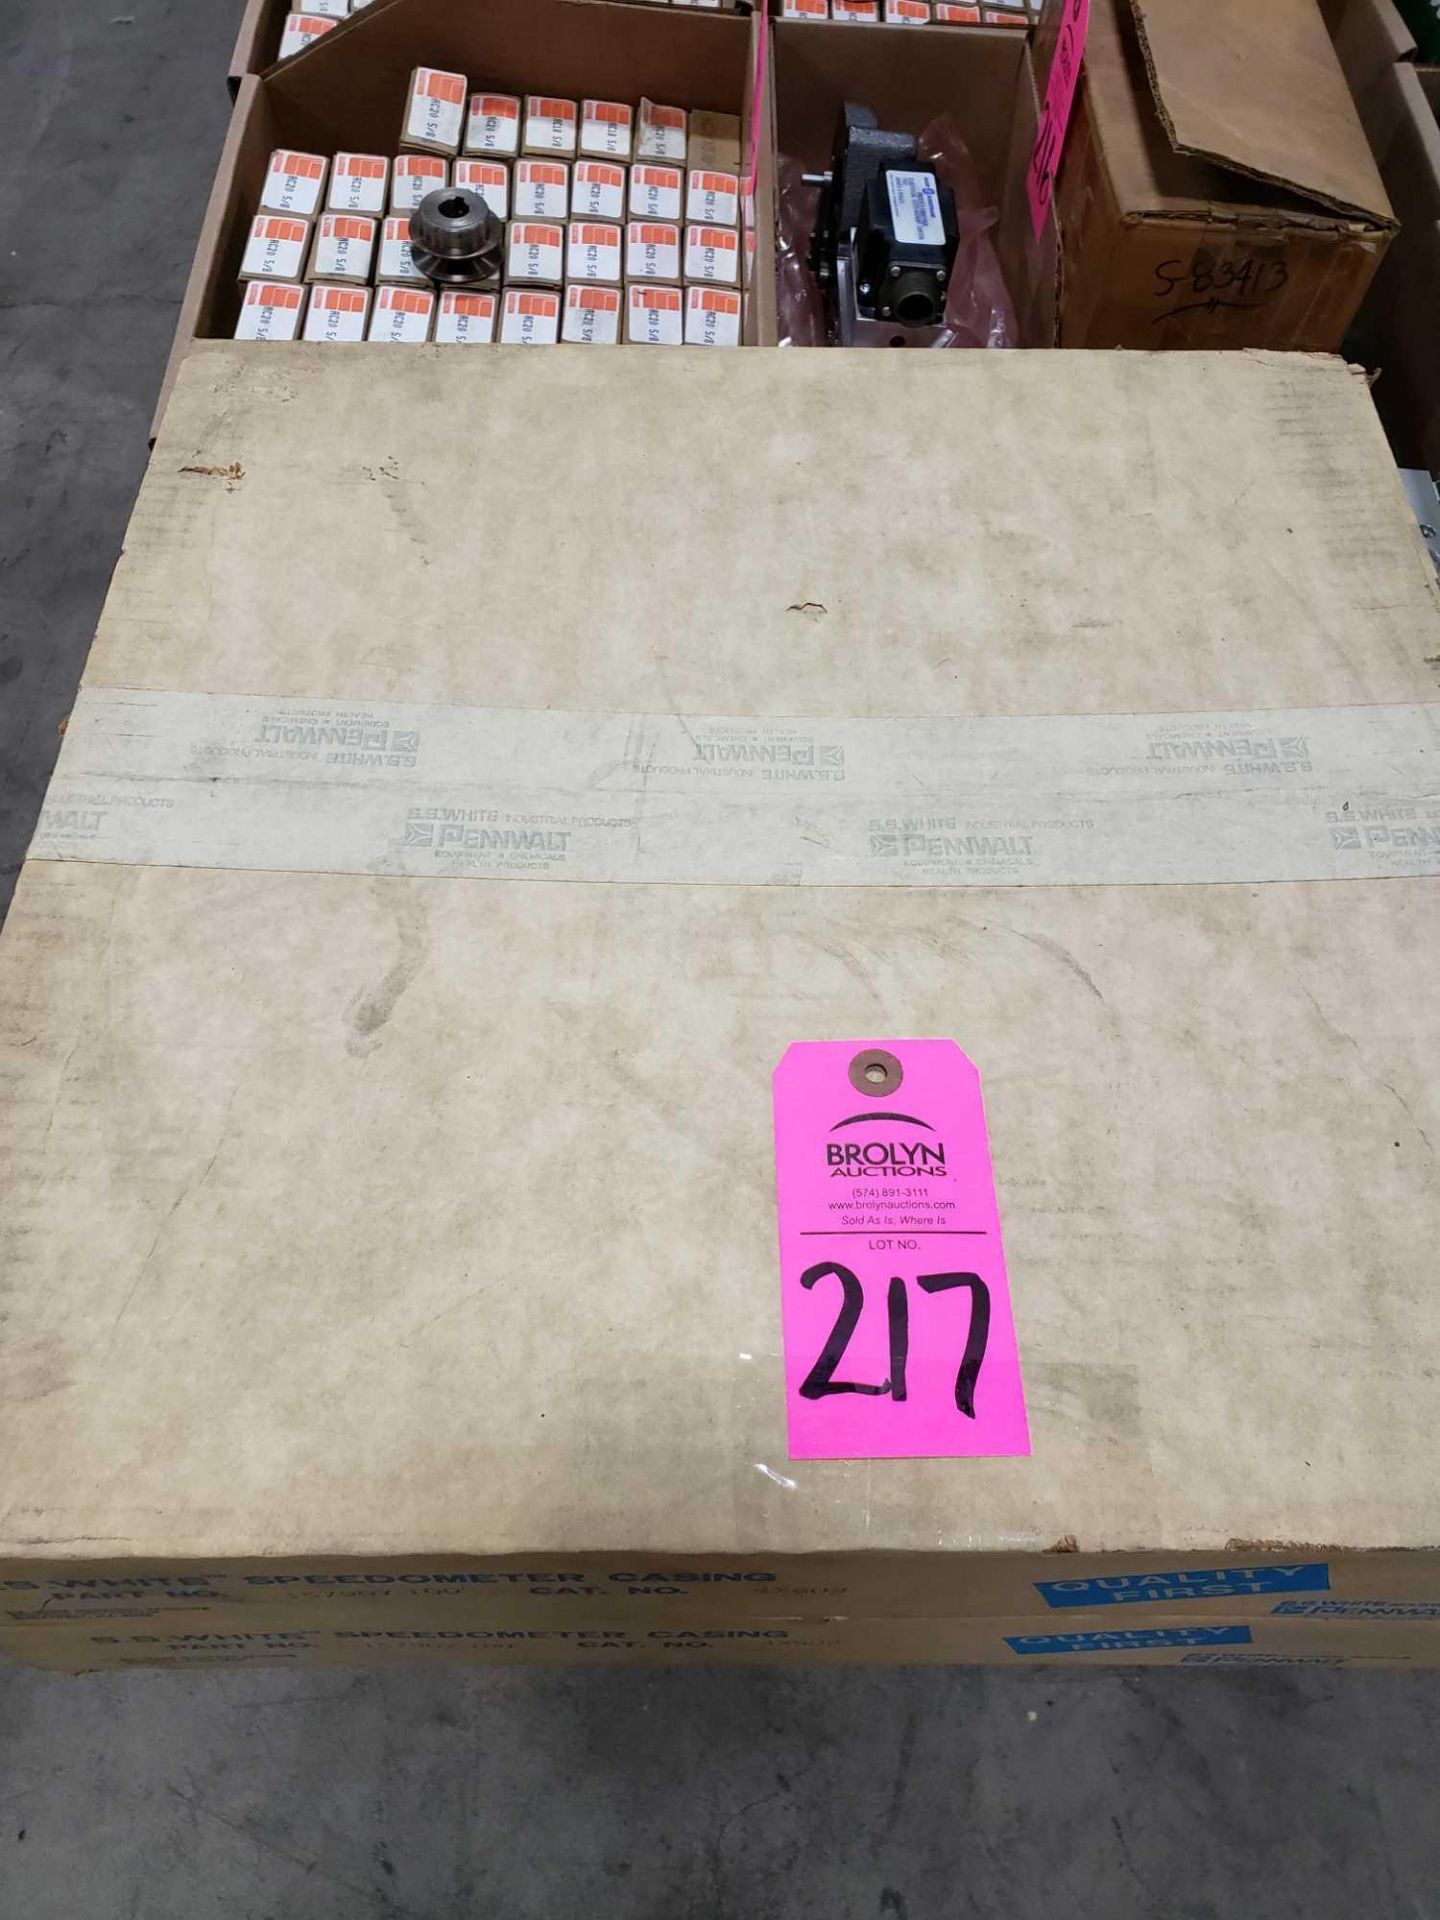 Qty 2 - S.S. White speedometer casing part number 15790Y-100, catalog 4X602. New in box.